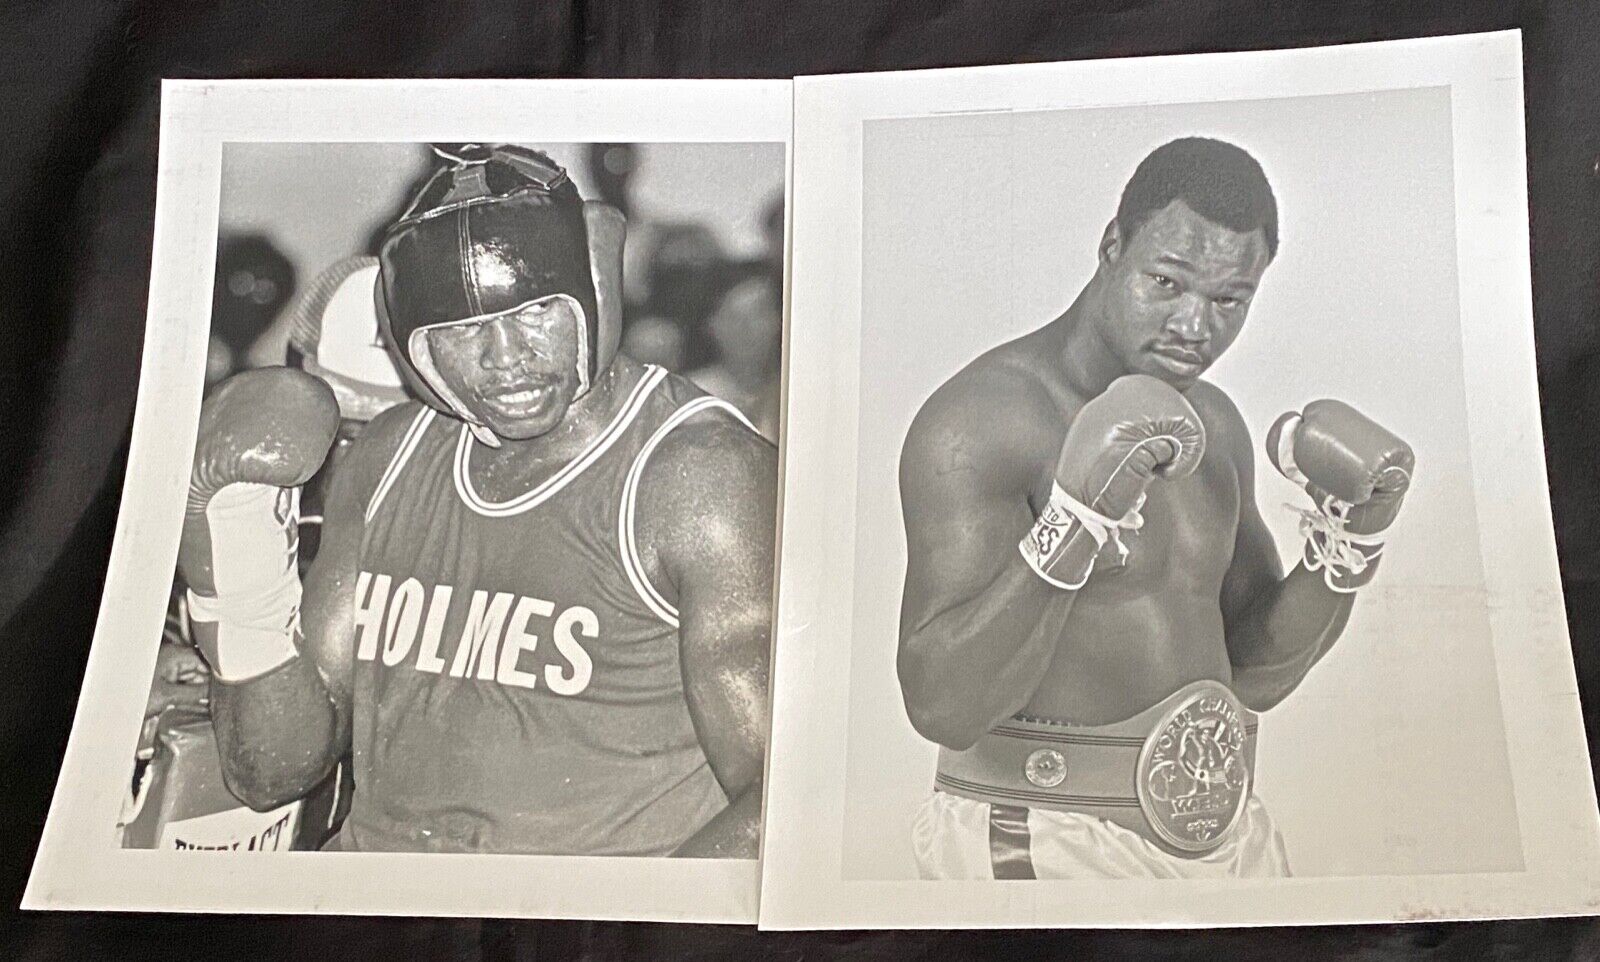 LARRY HOLMES 1982 TRAINING PHOTOS ( 8 x 10) pre WBC TITLE BOUT with GERRY COONEY Don King Productions